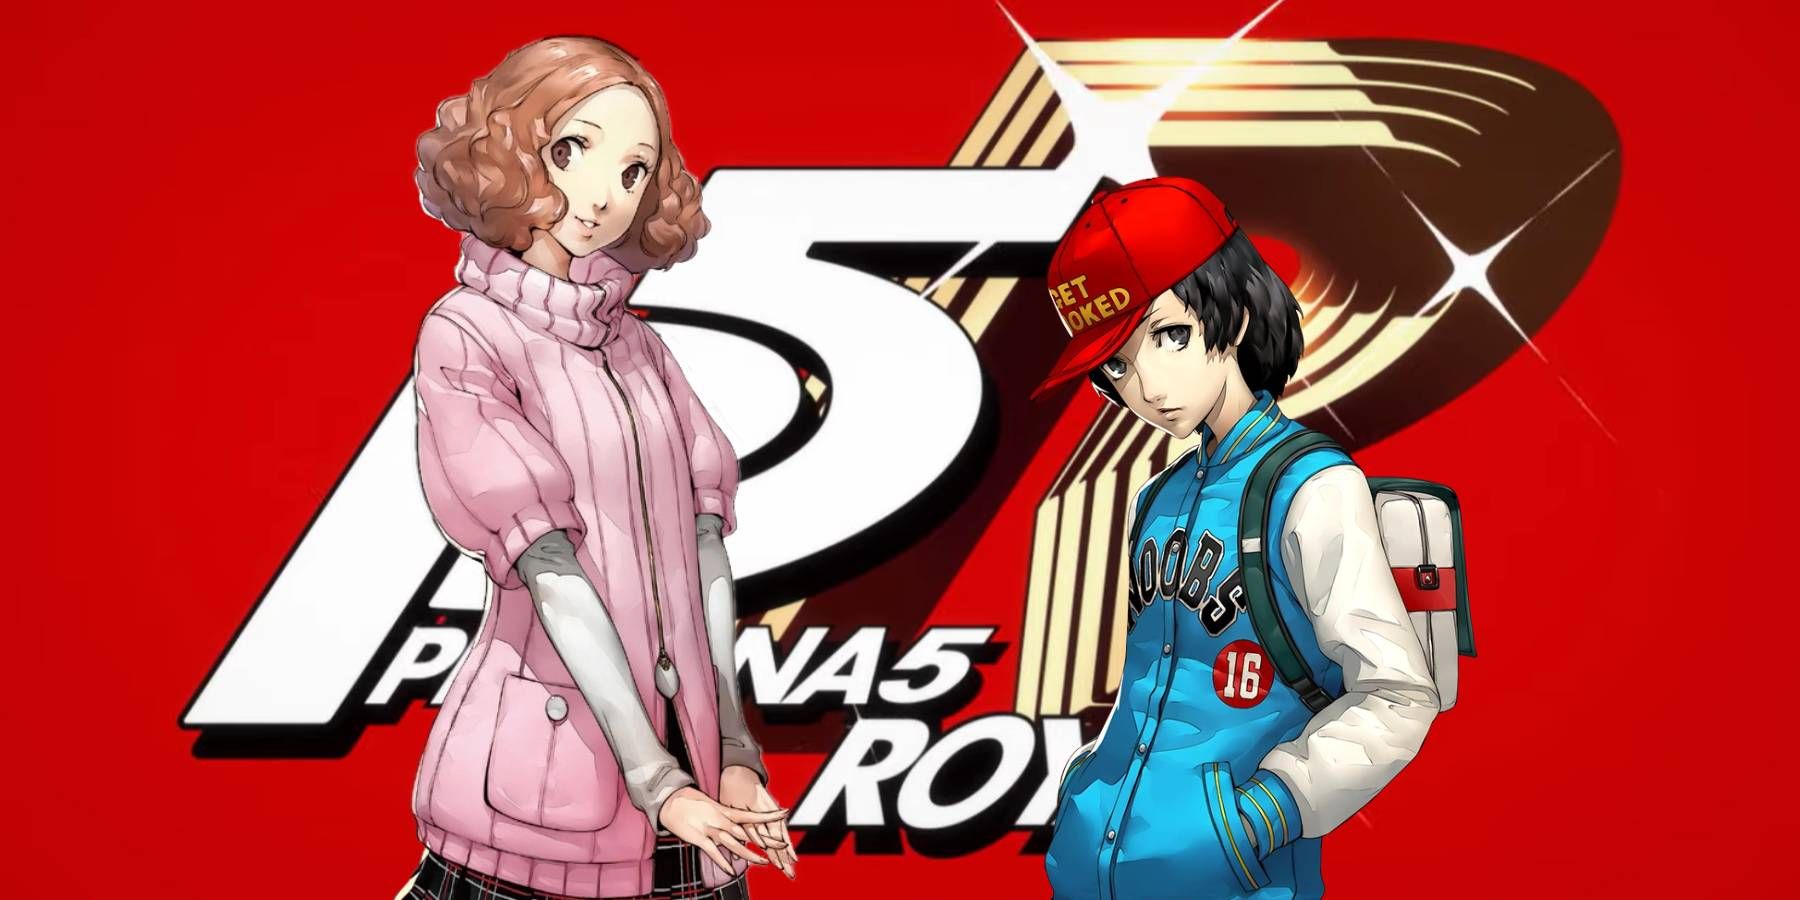 Haru and Shinya in front of the Persona 5 Royal logo from the game's intro